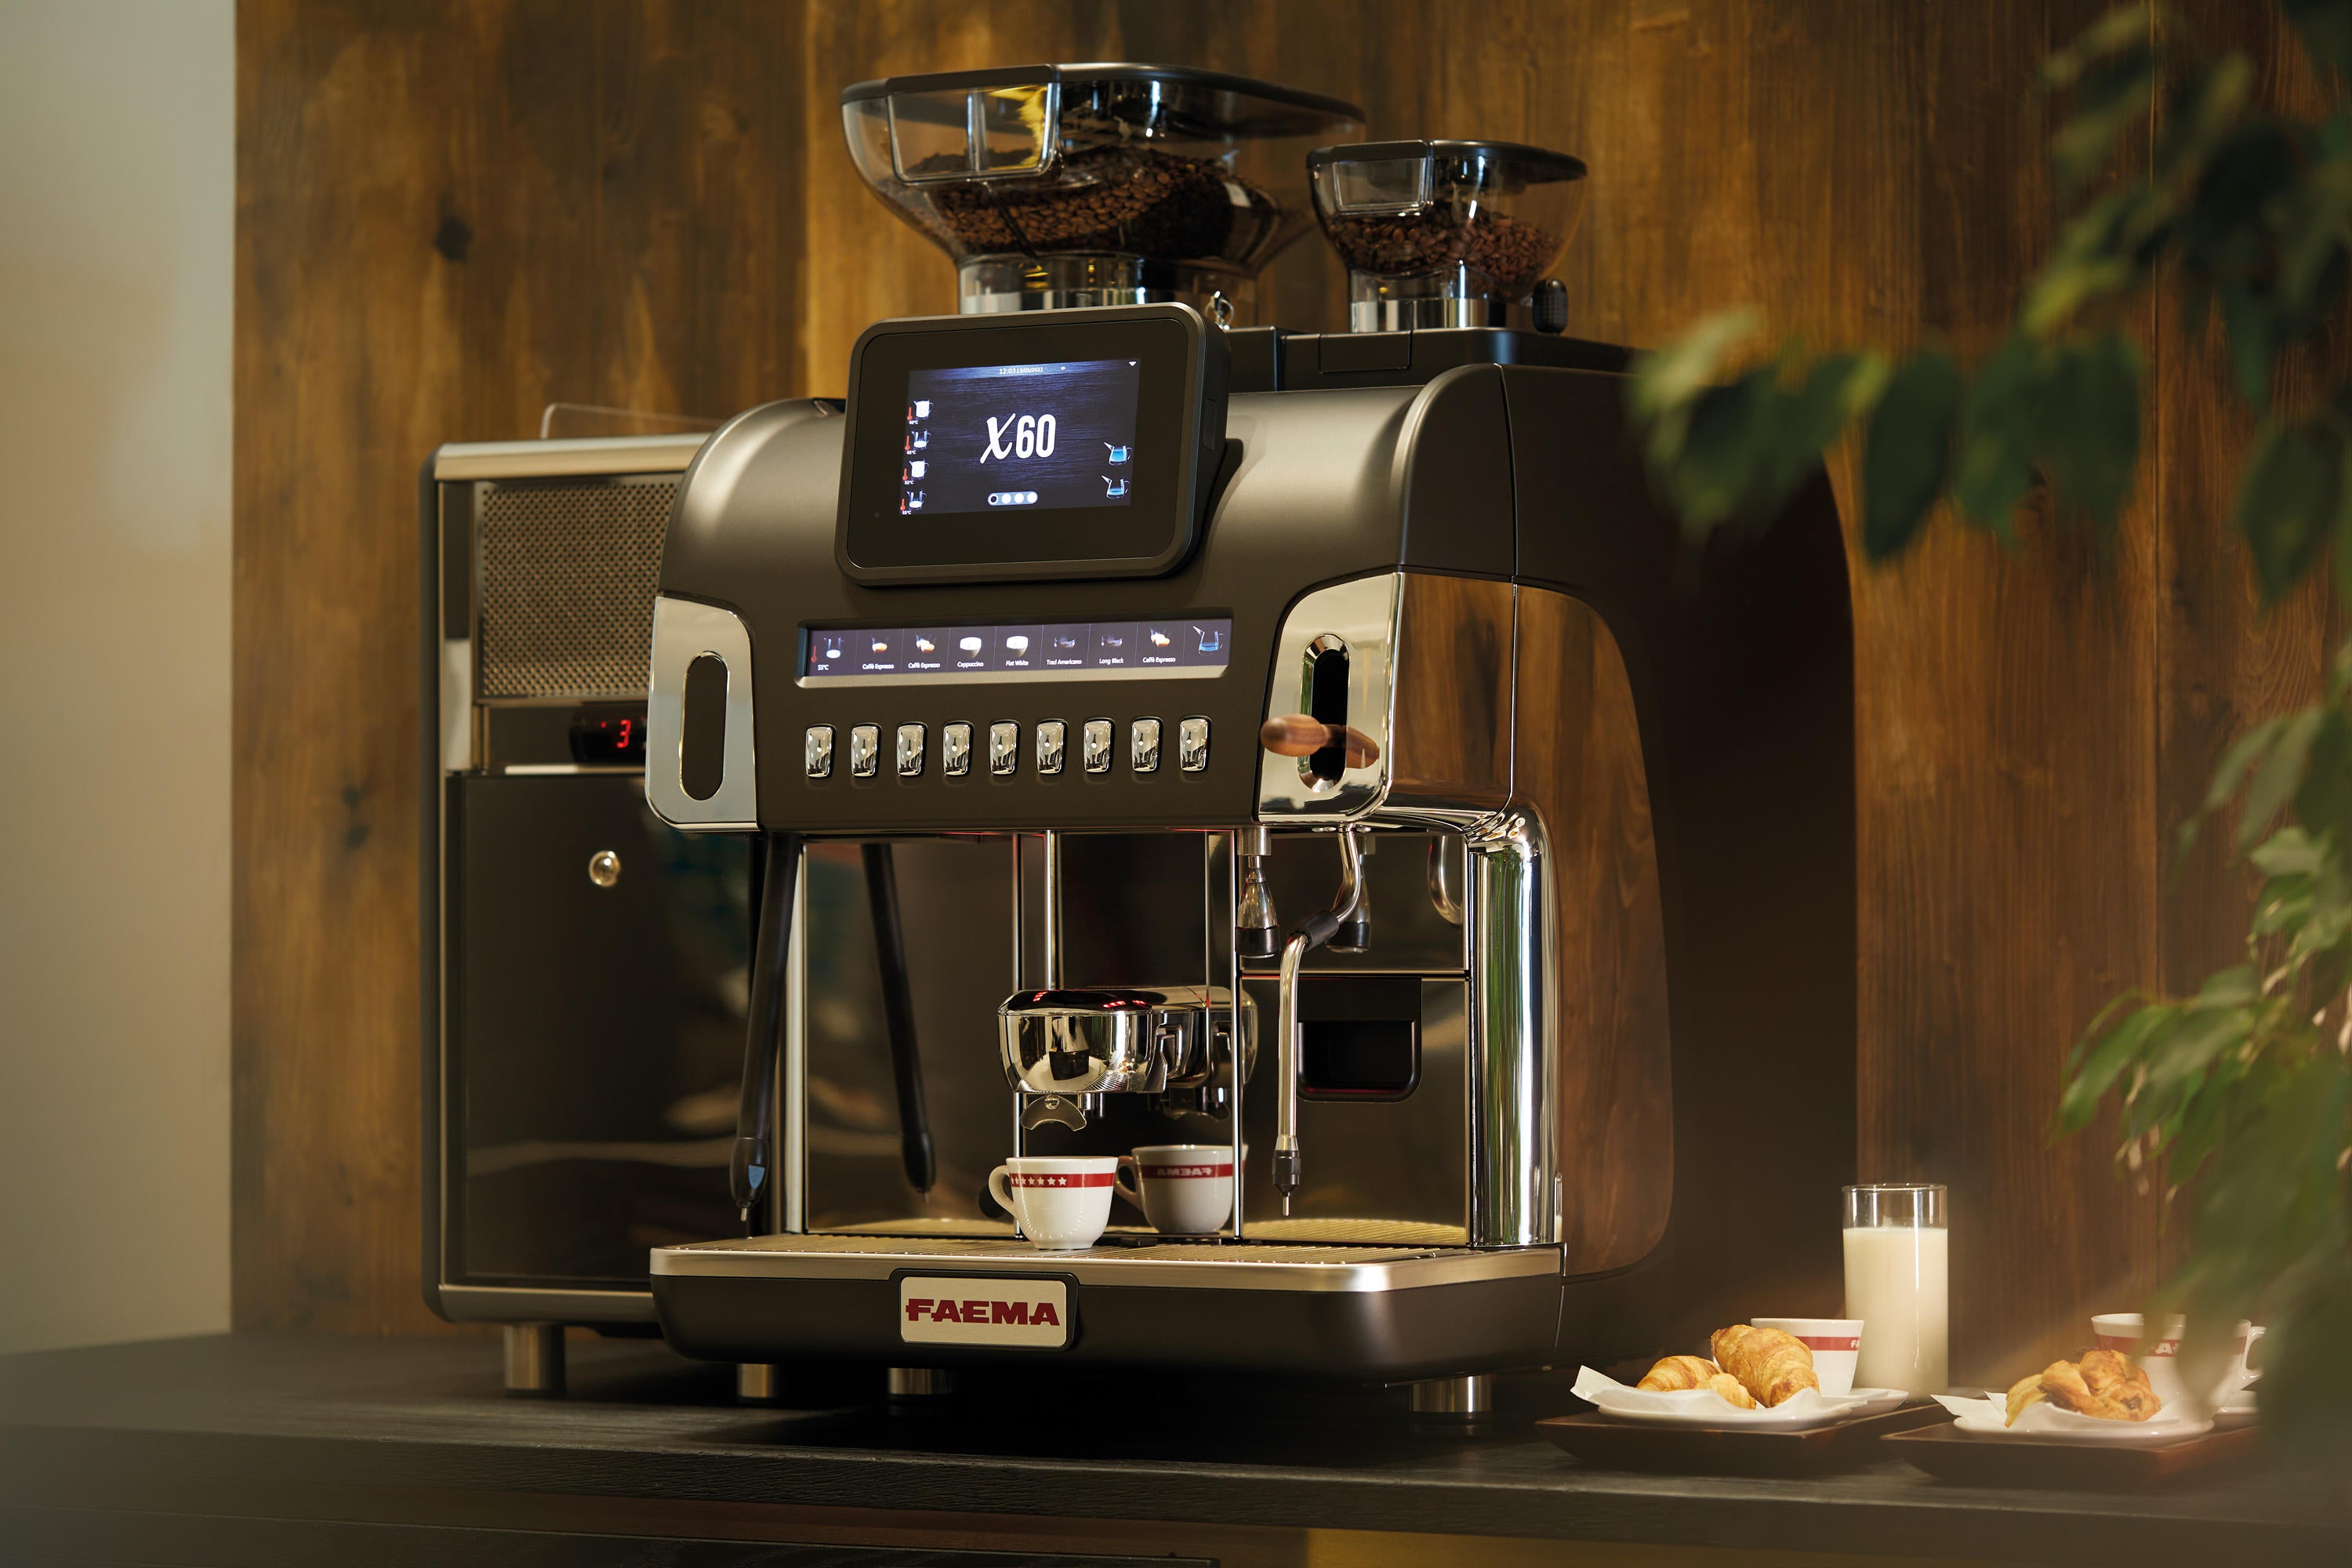 America Semi Automatic Professional Commercial Coffee Espresso Machine for  Shops Smart Arabic Coffee Maker with Best Price